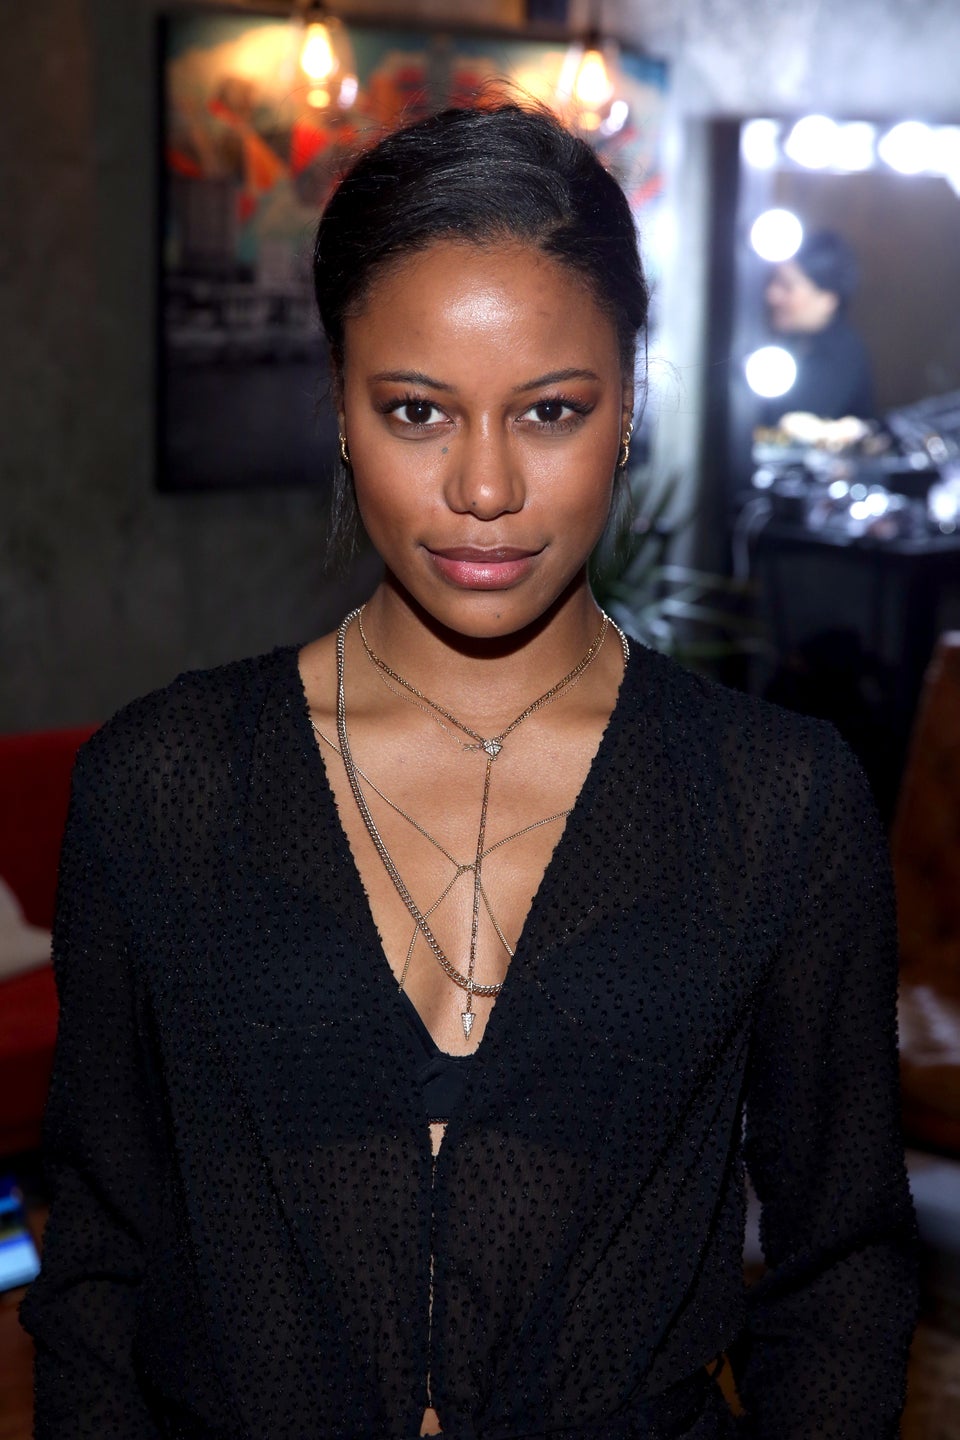 Taylour Paige To Star In Film Based On Epic Twitter Story About Zola The Stripper